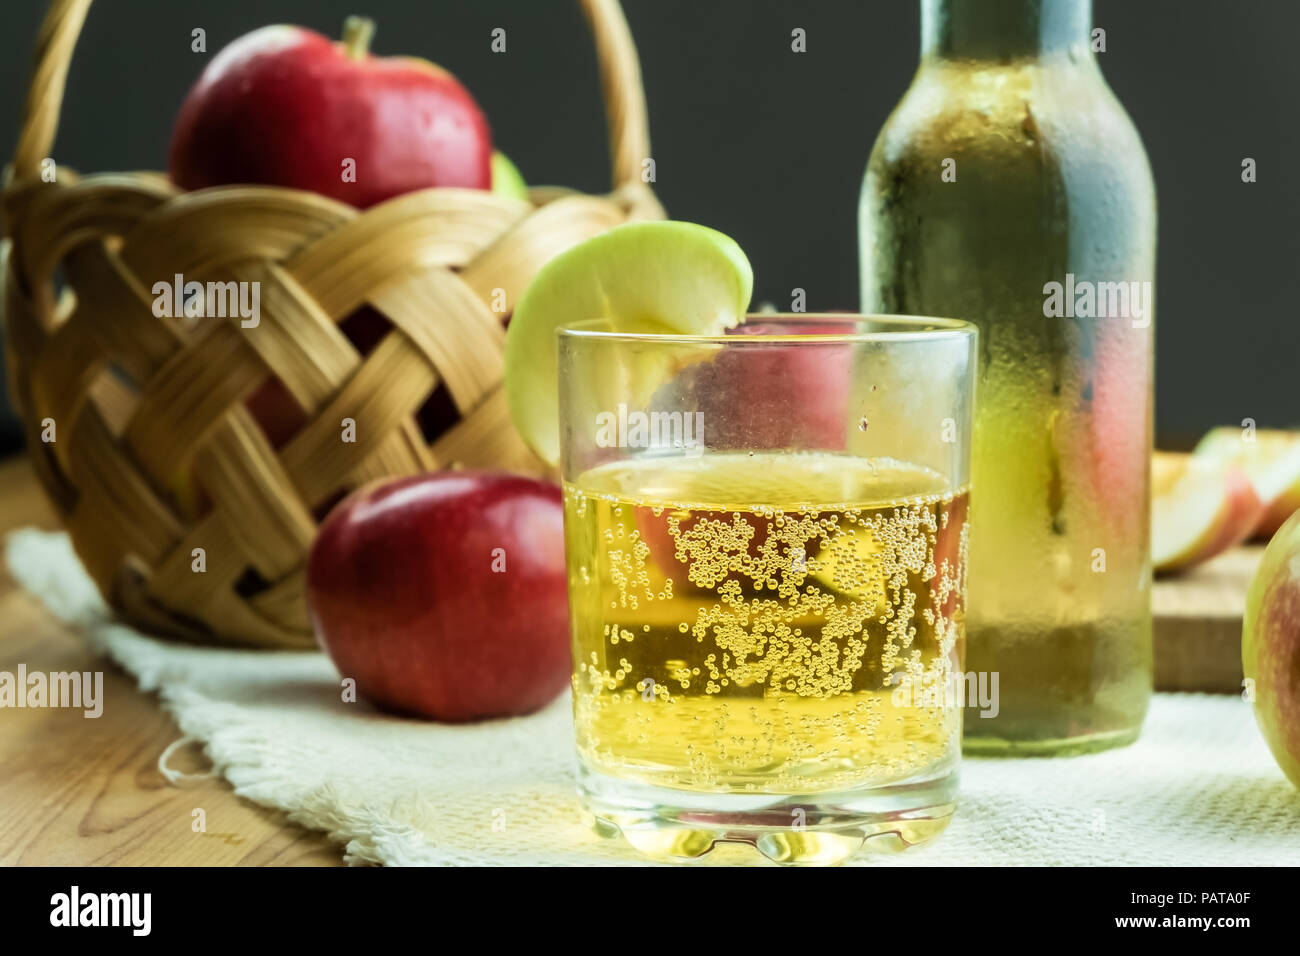 Close-up image of sparkling cidre drink and ripe juicy apples on rustic wooden table. Glass of home made cider and locally grown organic apples Stock Photo